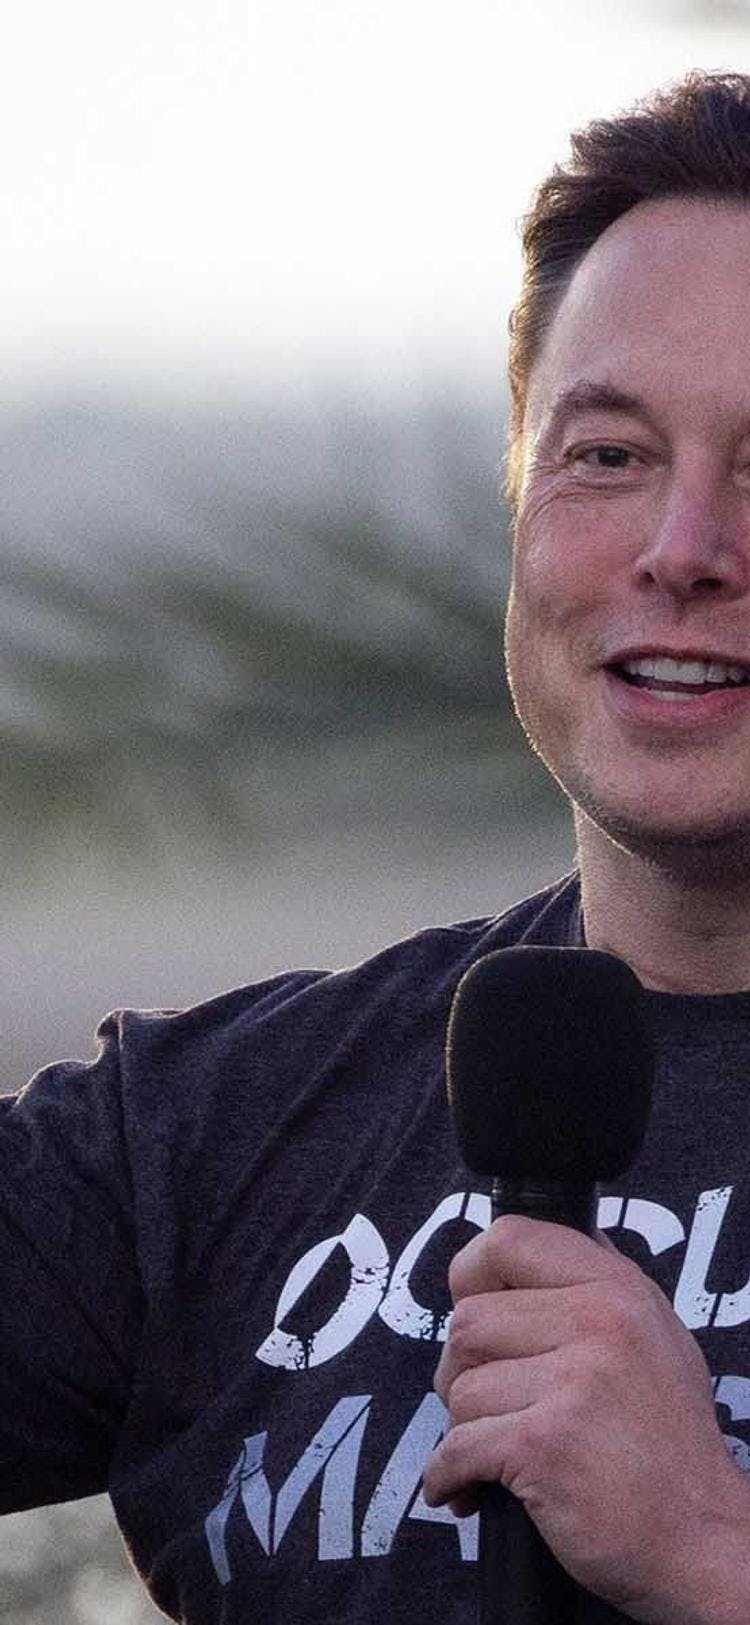 in a public twitter poll, elon musk asked if twitter wanted him to step down as the head of twitter. the internet answered -- they said they wanted elon gone